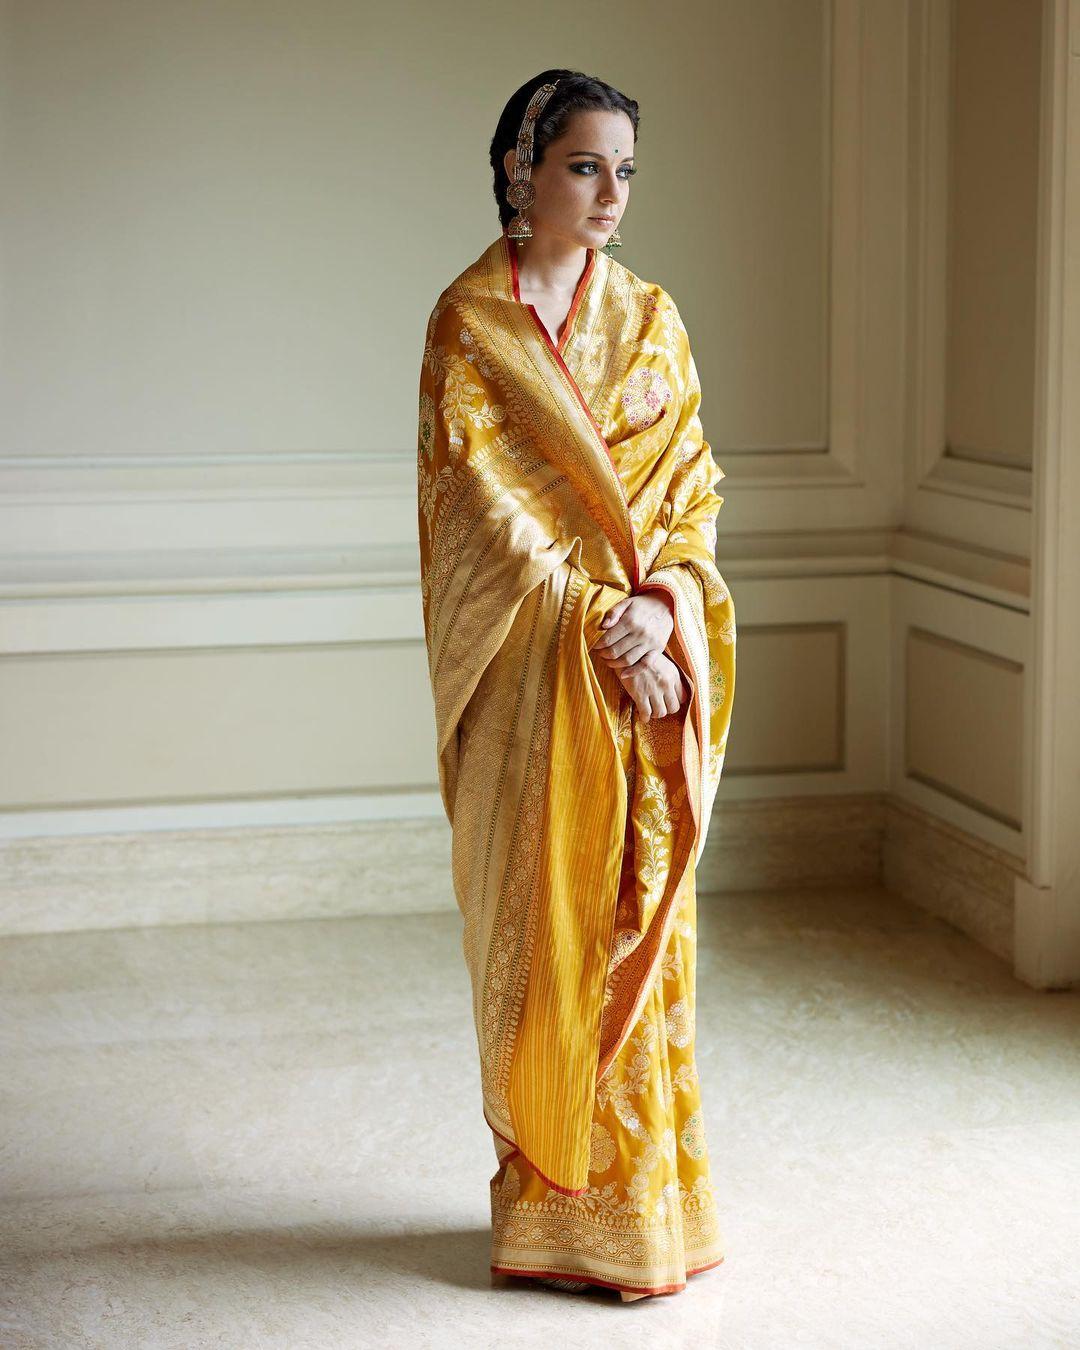 Wondering how to style a saree to look stunning? Take cues from Kangana Ranaut. The actress wore a beautiful Banarasi yellow saree with contrasting green and red designs on it